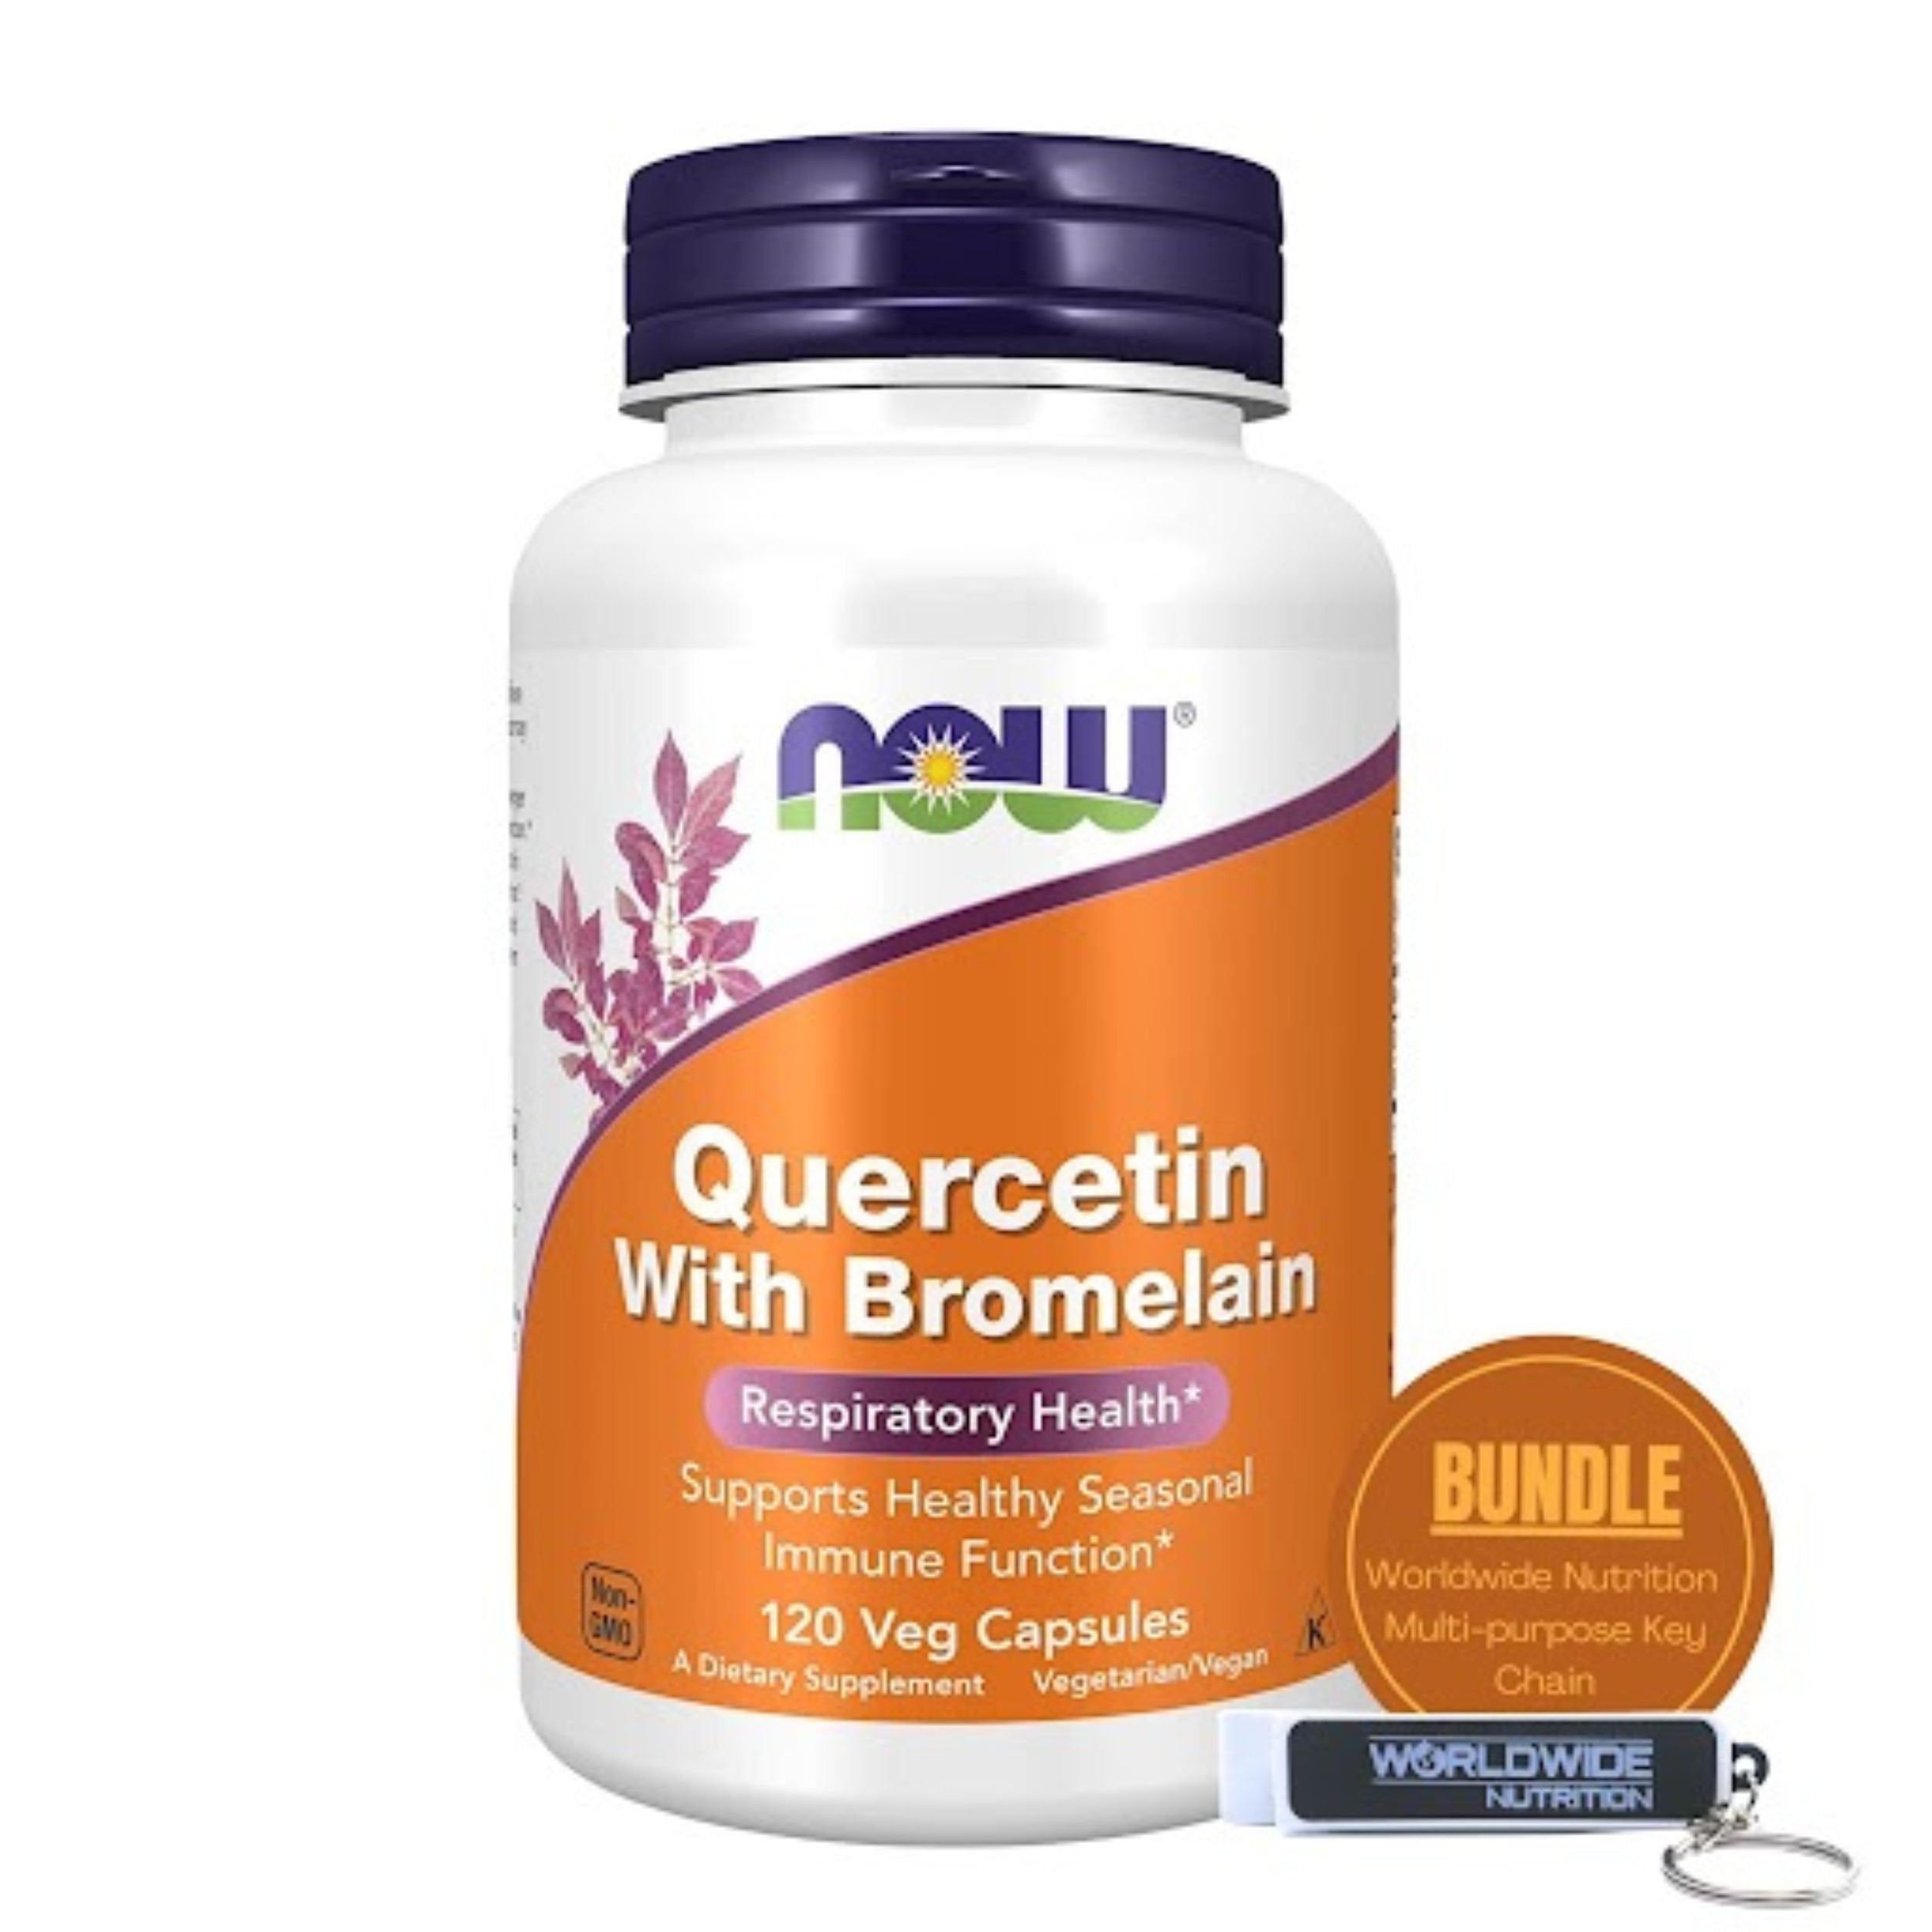 Worldwide Nutrition Now Supplements, Quercetin with Bromelain, Balanced Immune System Support, 120 Veg Capsules with Multi Purpose Key Chain